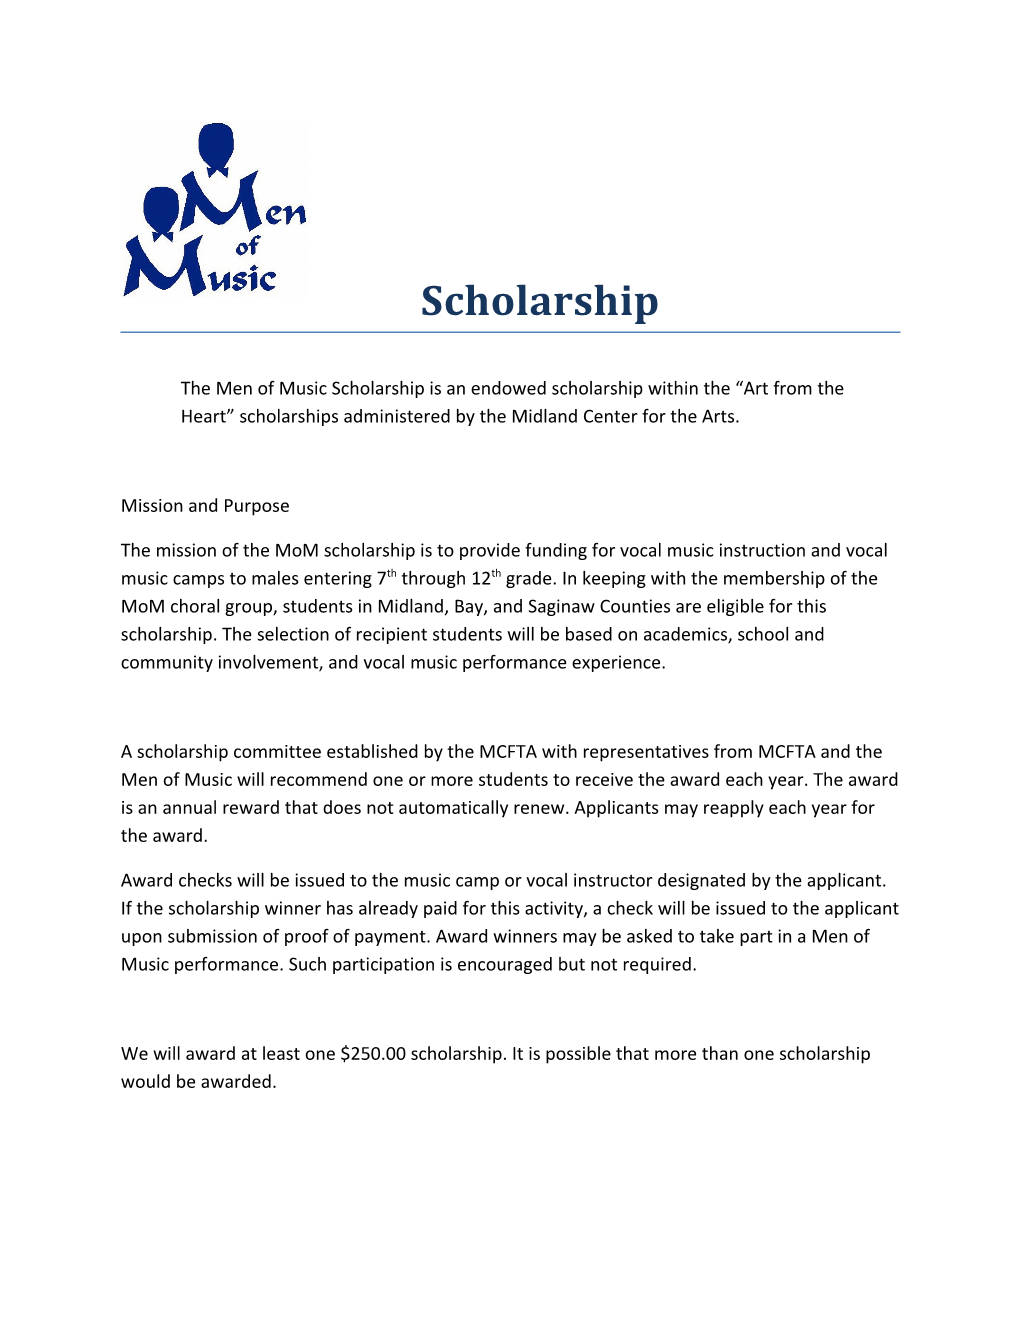 The Men of Music Scholarship Is an Endowed Scholarship Within the Art from the Heart